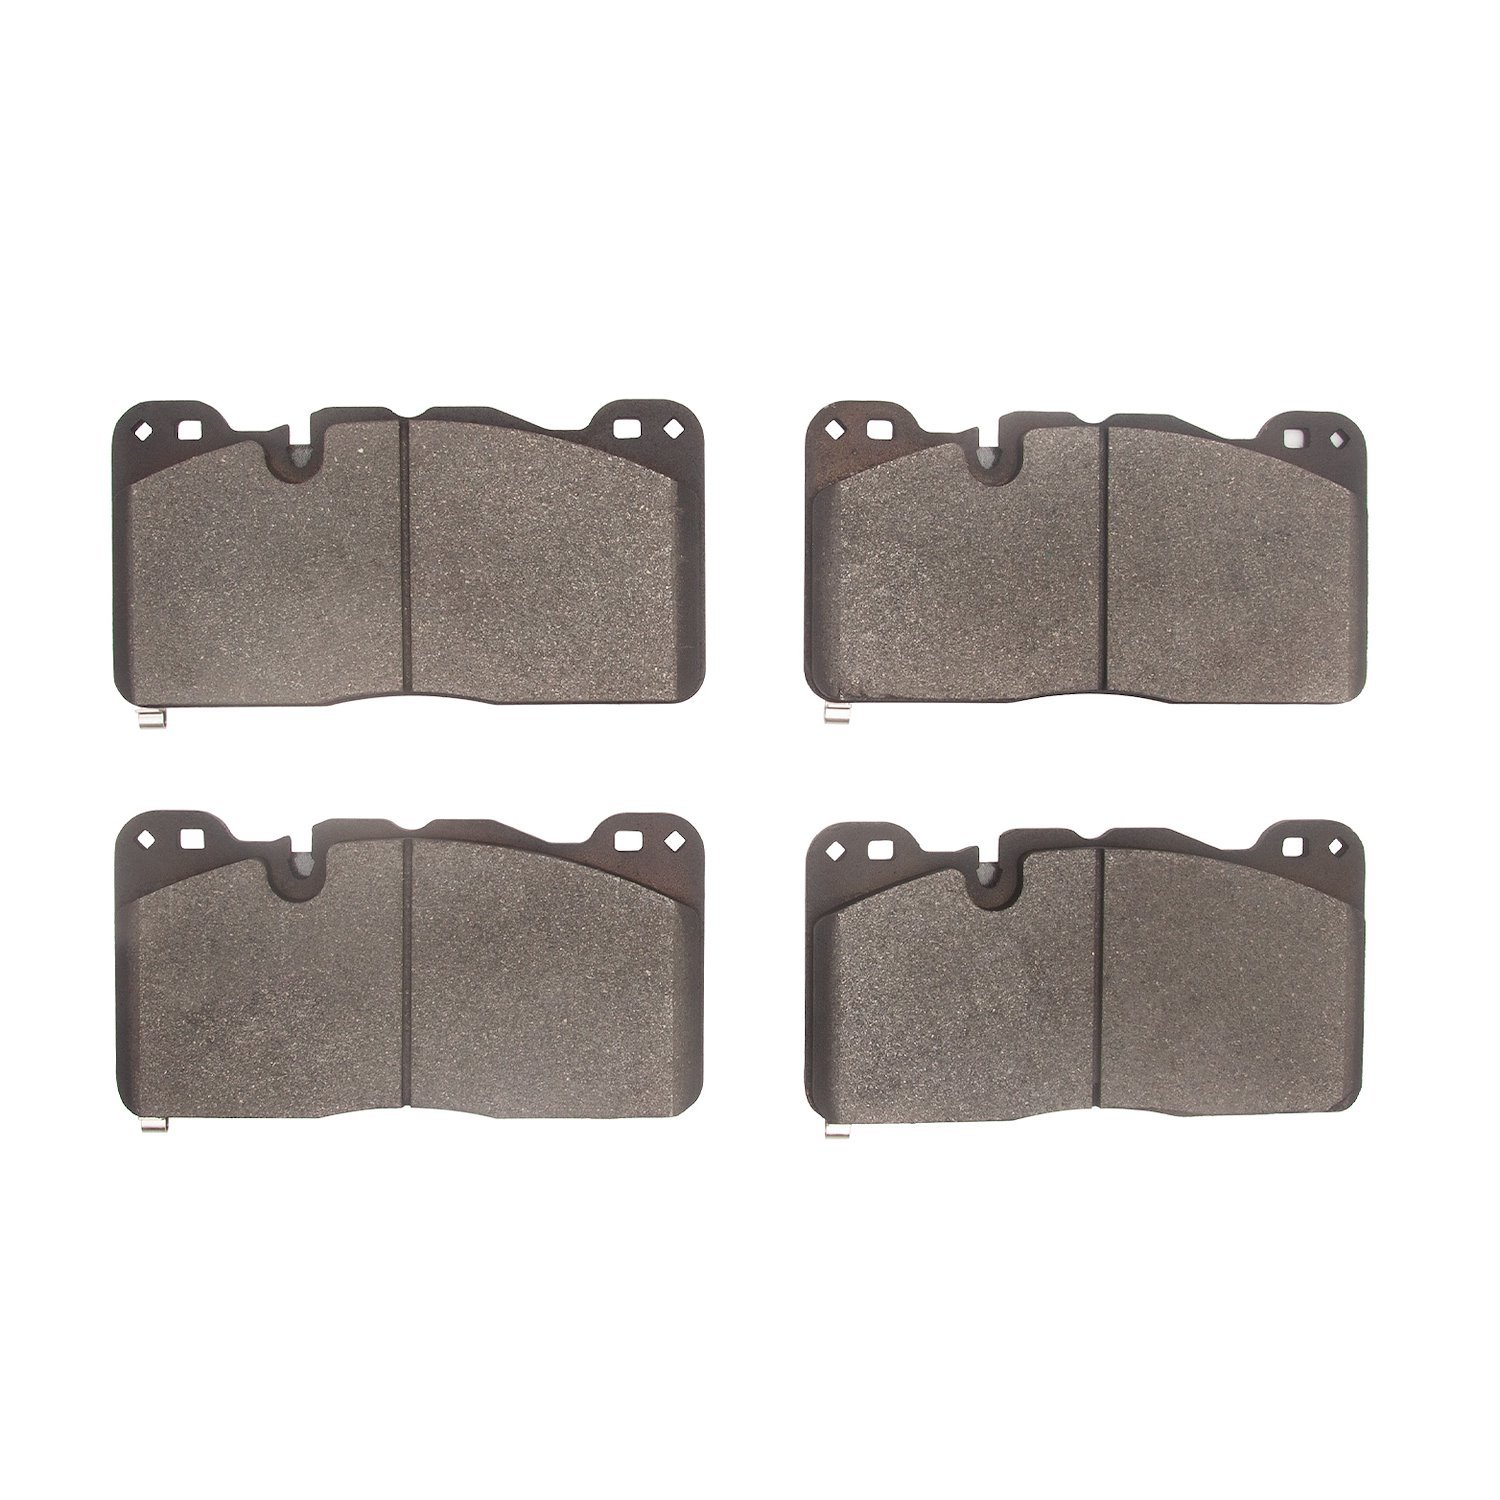 1551-2446-00 5000 Advanced Low-Metallic Brake Pads, Fits Select GM, Position: Front